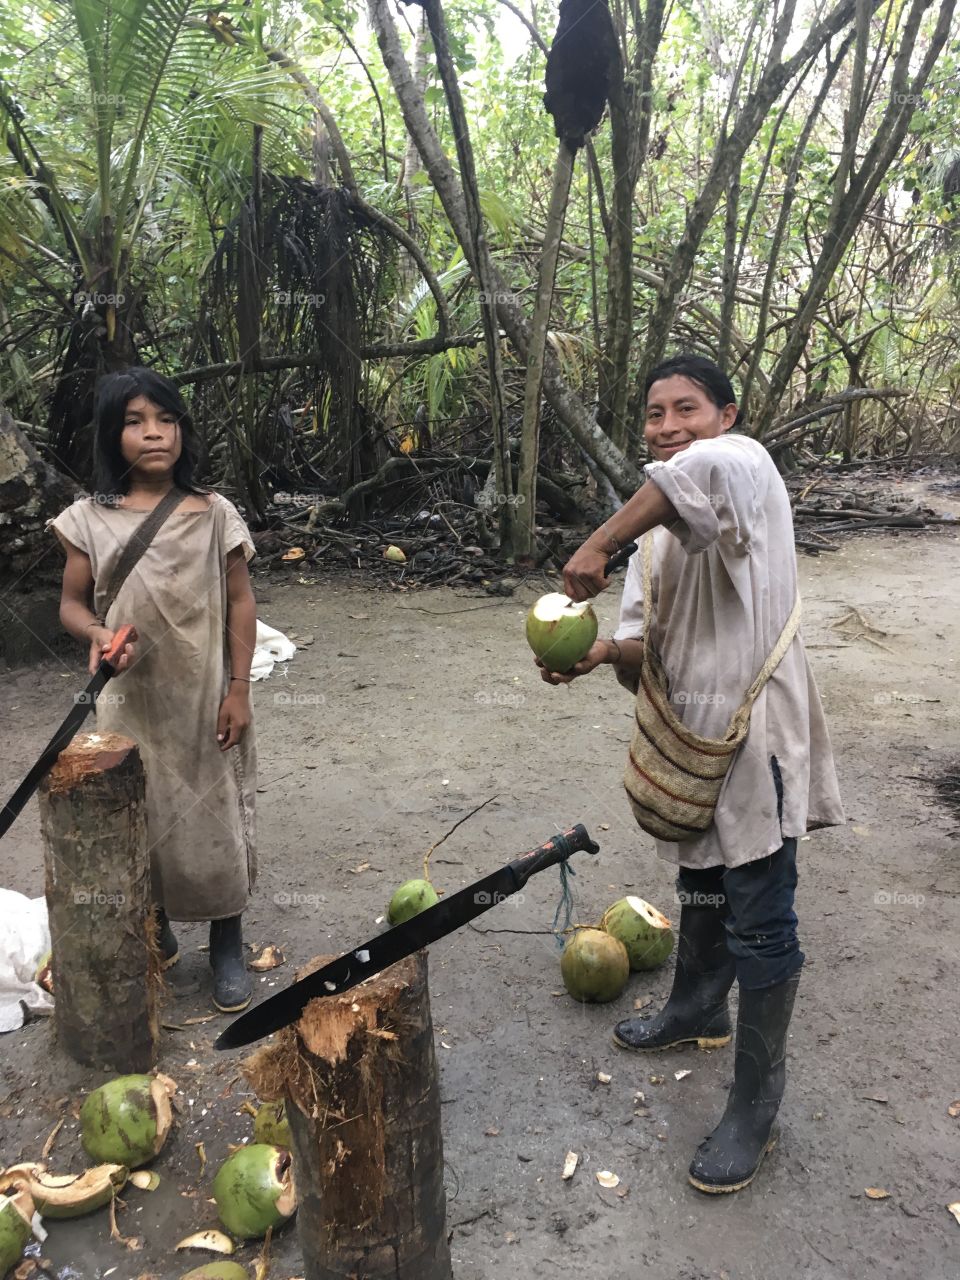 Indigenous people in Tayrona National Park, Colombia